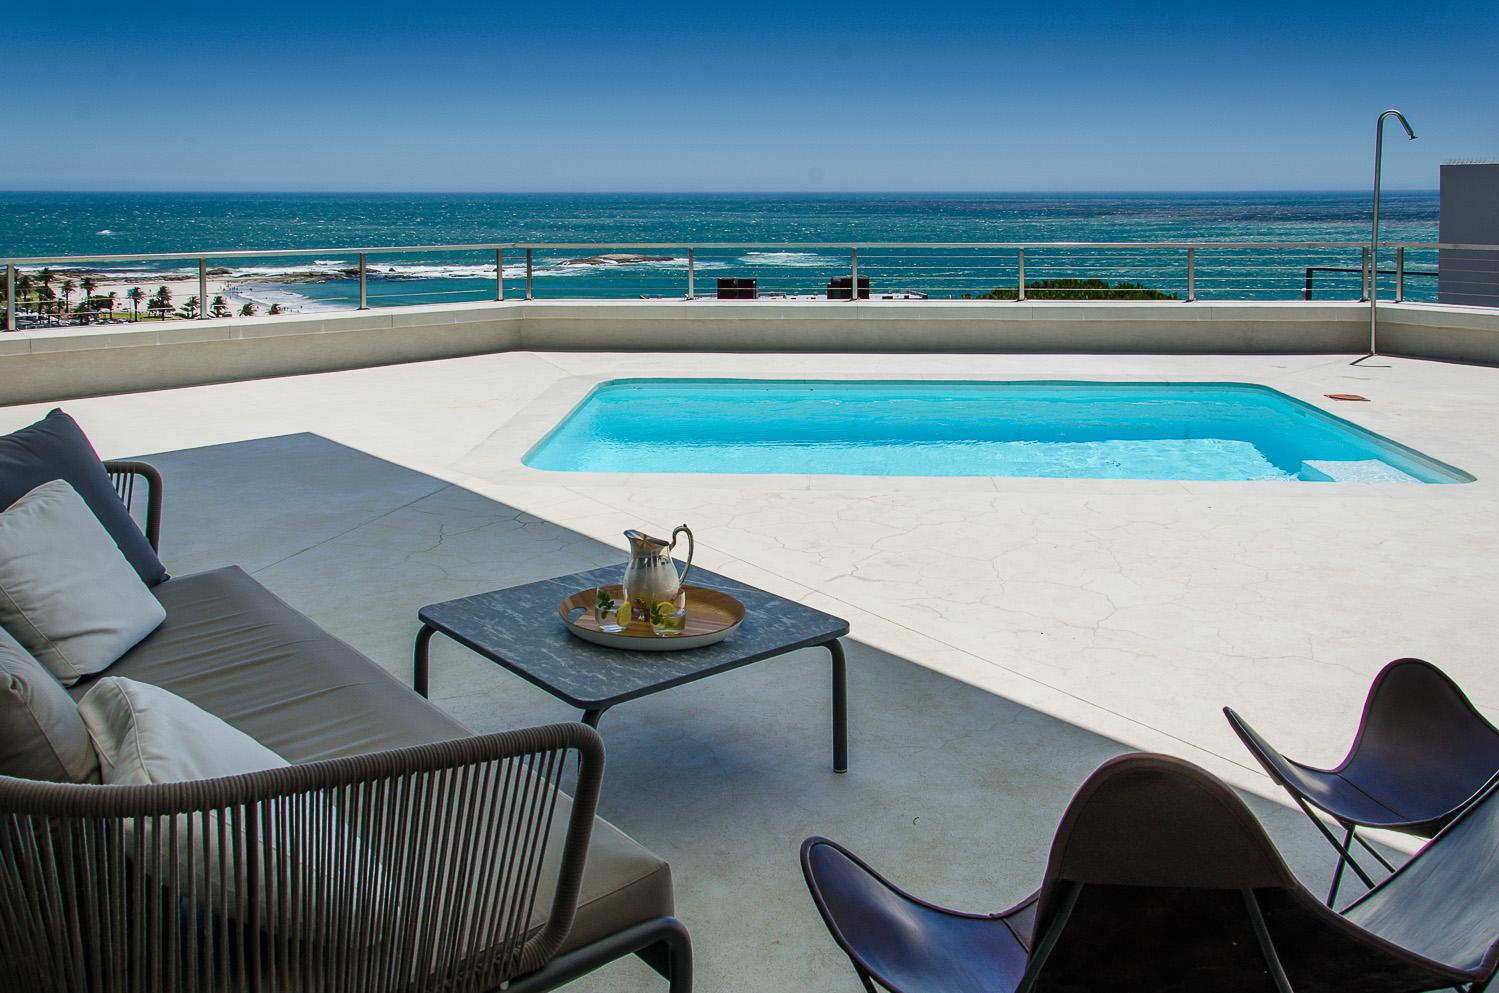 Photo 1 of Strathmore Dream accommodation in Camps Bay, Cape Town with 4 bedrooms and 3 bathrooms